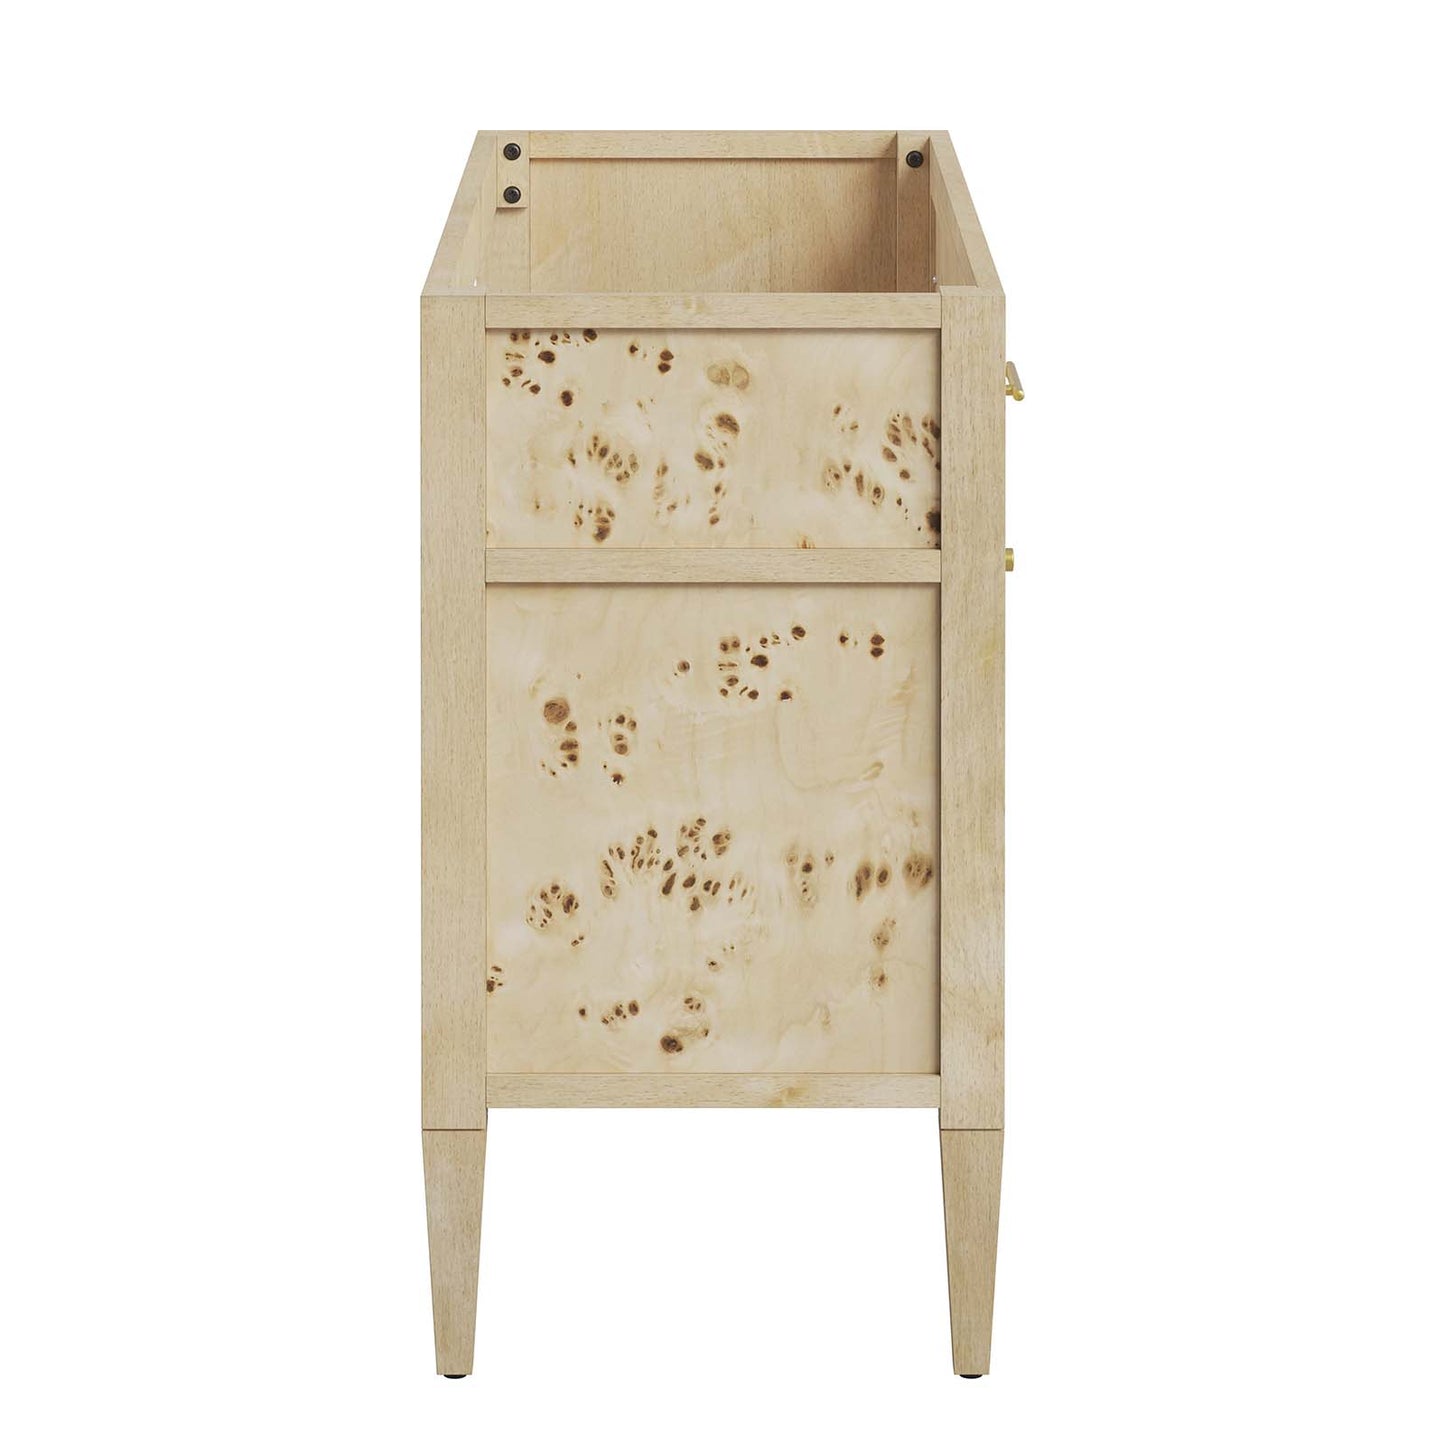 Elysian 48" Wood Bathroom Vanity Cabinet (Sink Basin Not Included) By Modway - EEI-6140 | Bathroom Accessories | Modway - 12